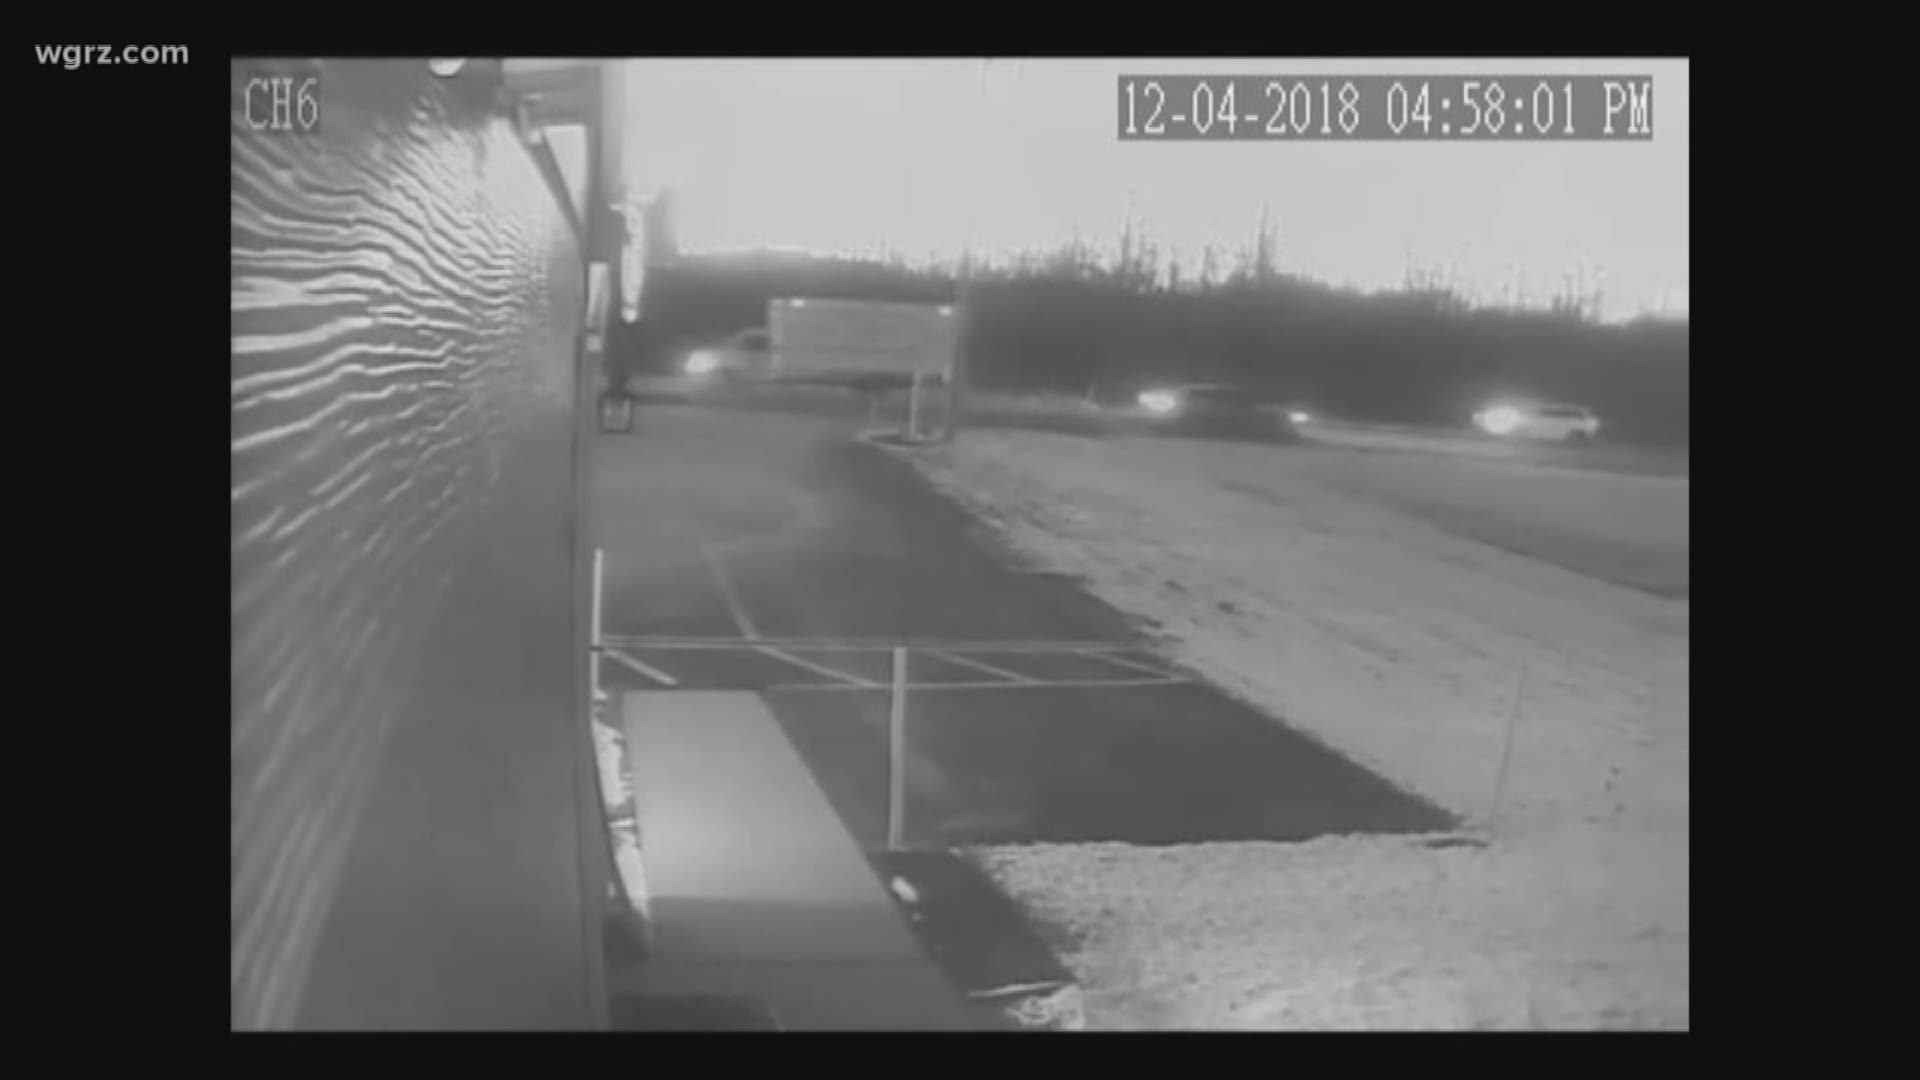 Sheriff's Hope Some Video Can Help Solve A Serious Hit & Run Accident